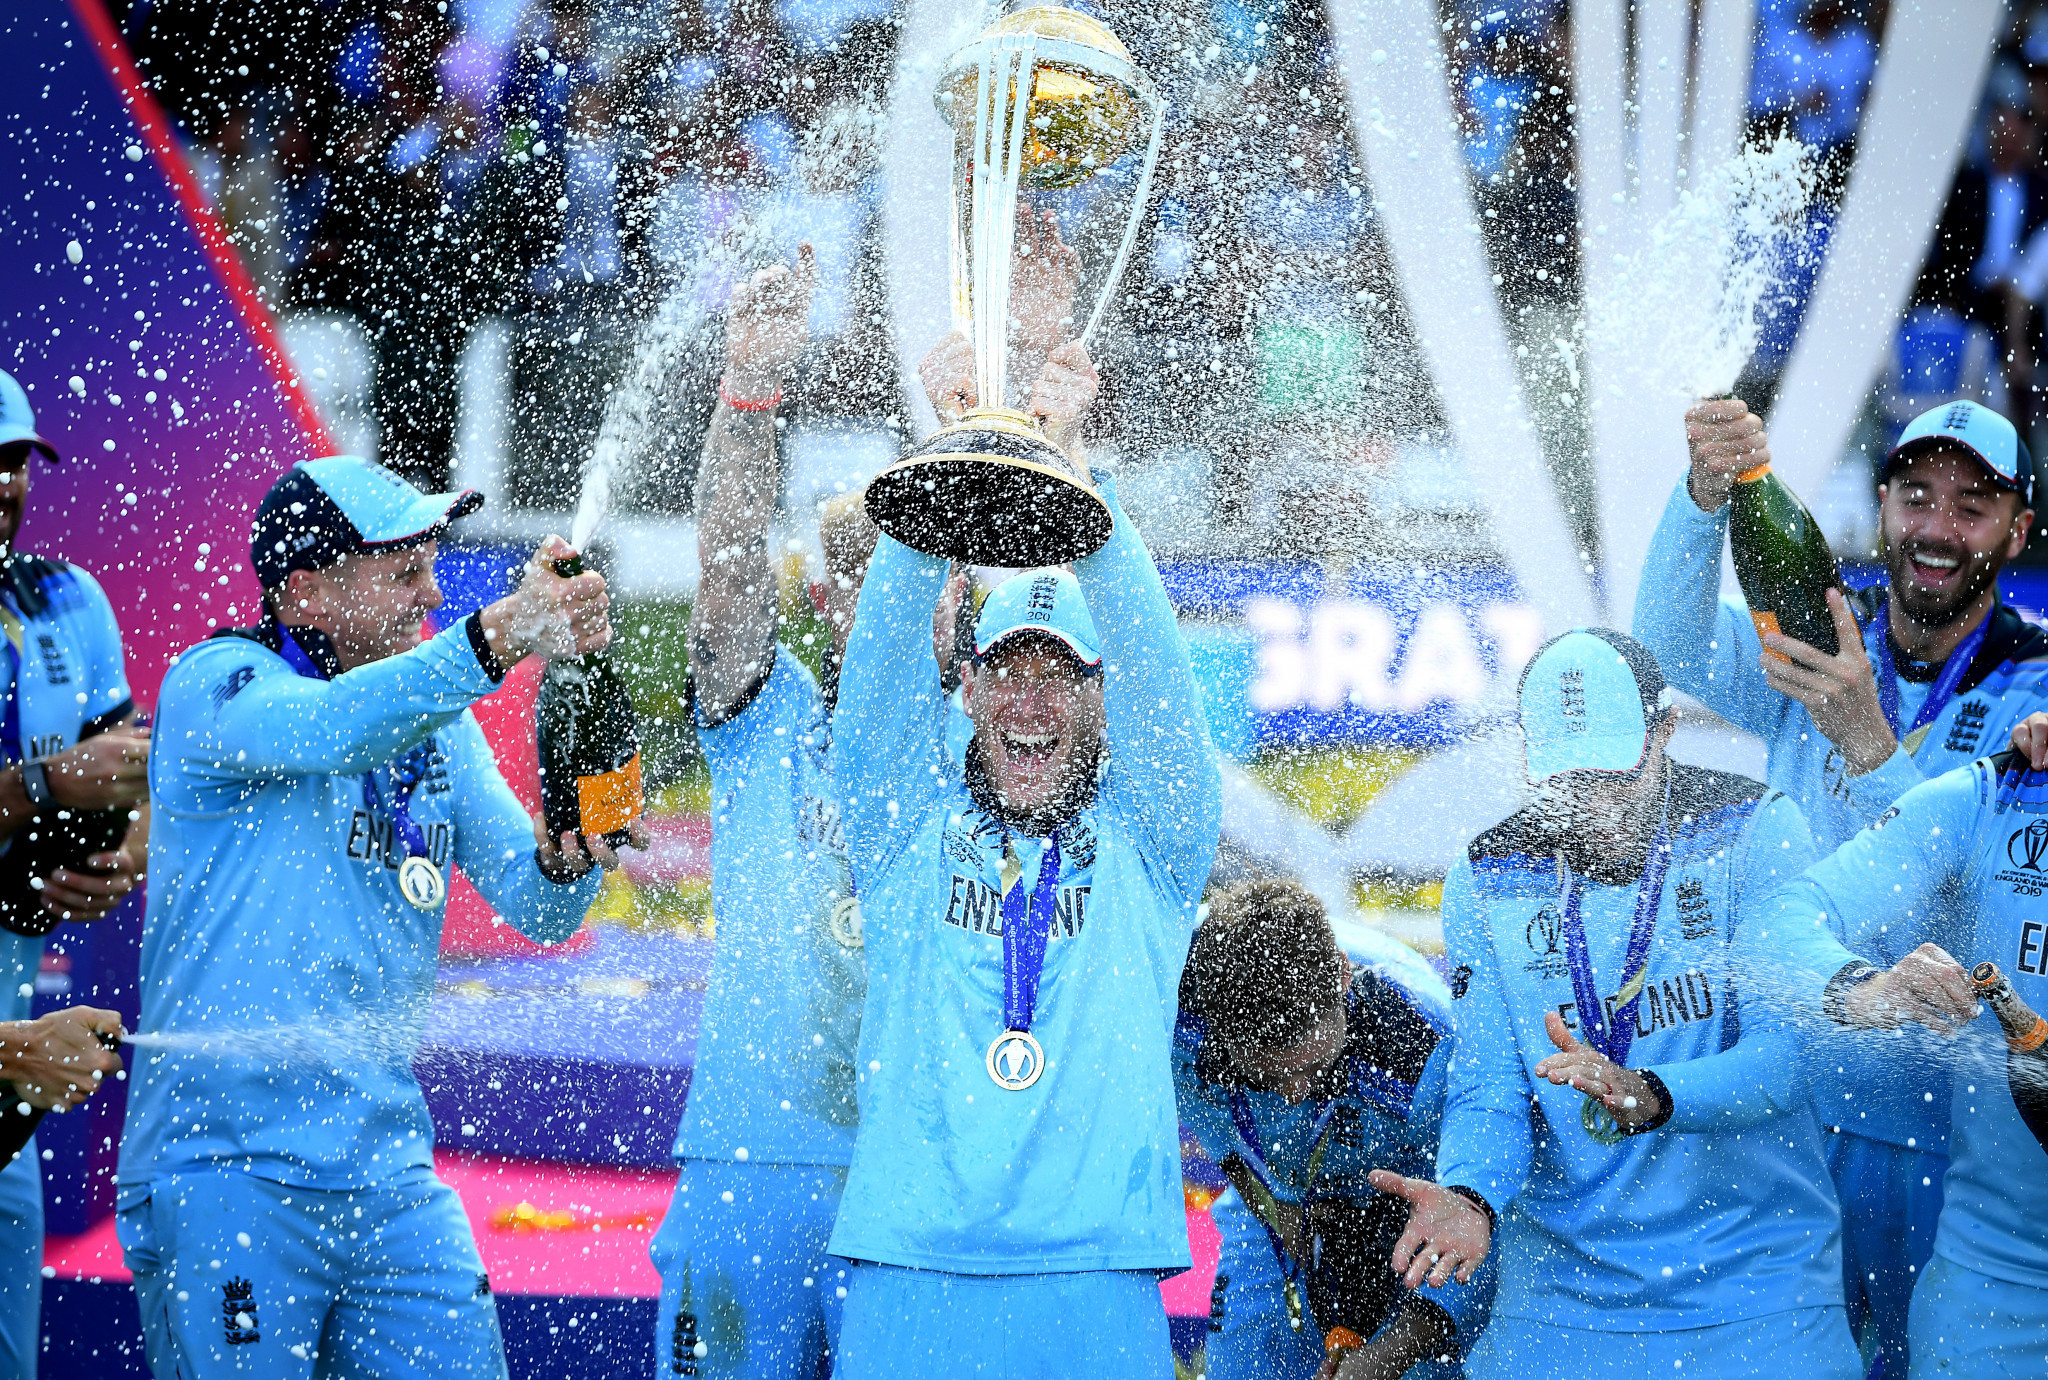 Icc Launches Super League To Decide Seven Qualifiers For 2023 Cricket World Cup 1842